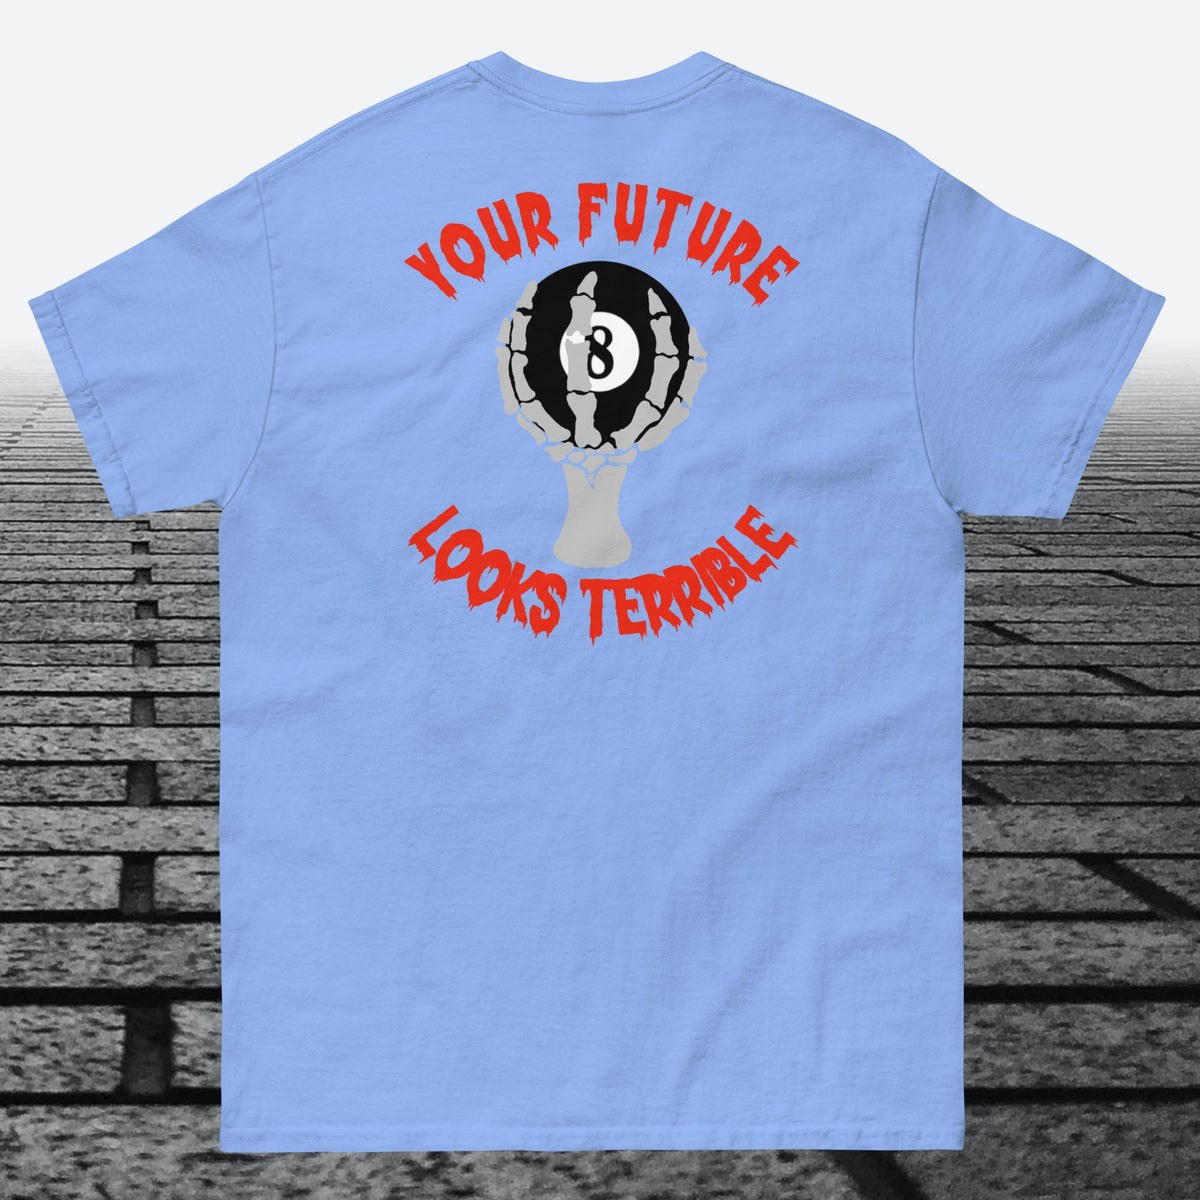 Your Future Looks Terrible with 8 ball, with logo on the front, Cotton t-shirt